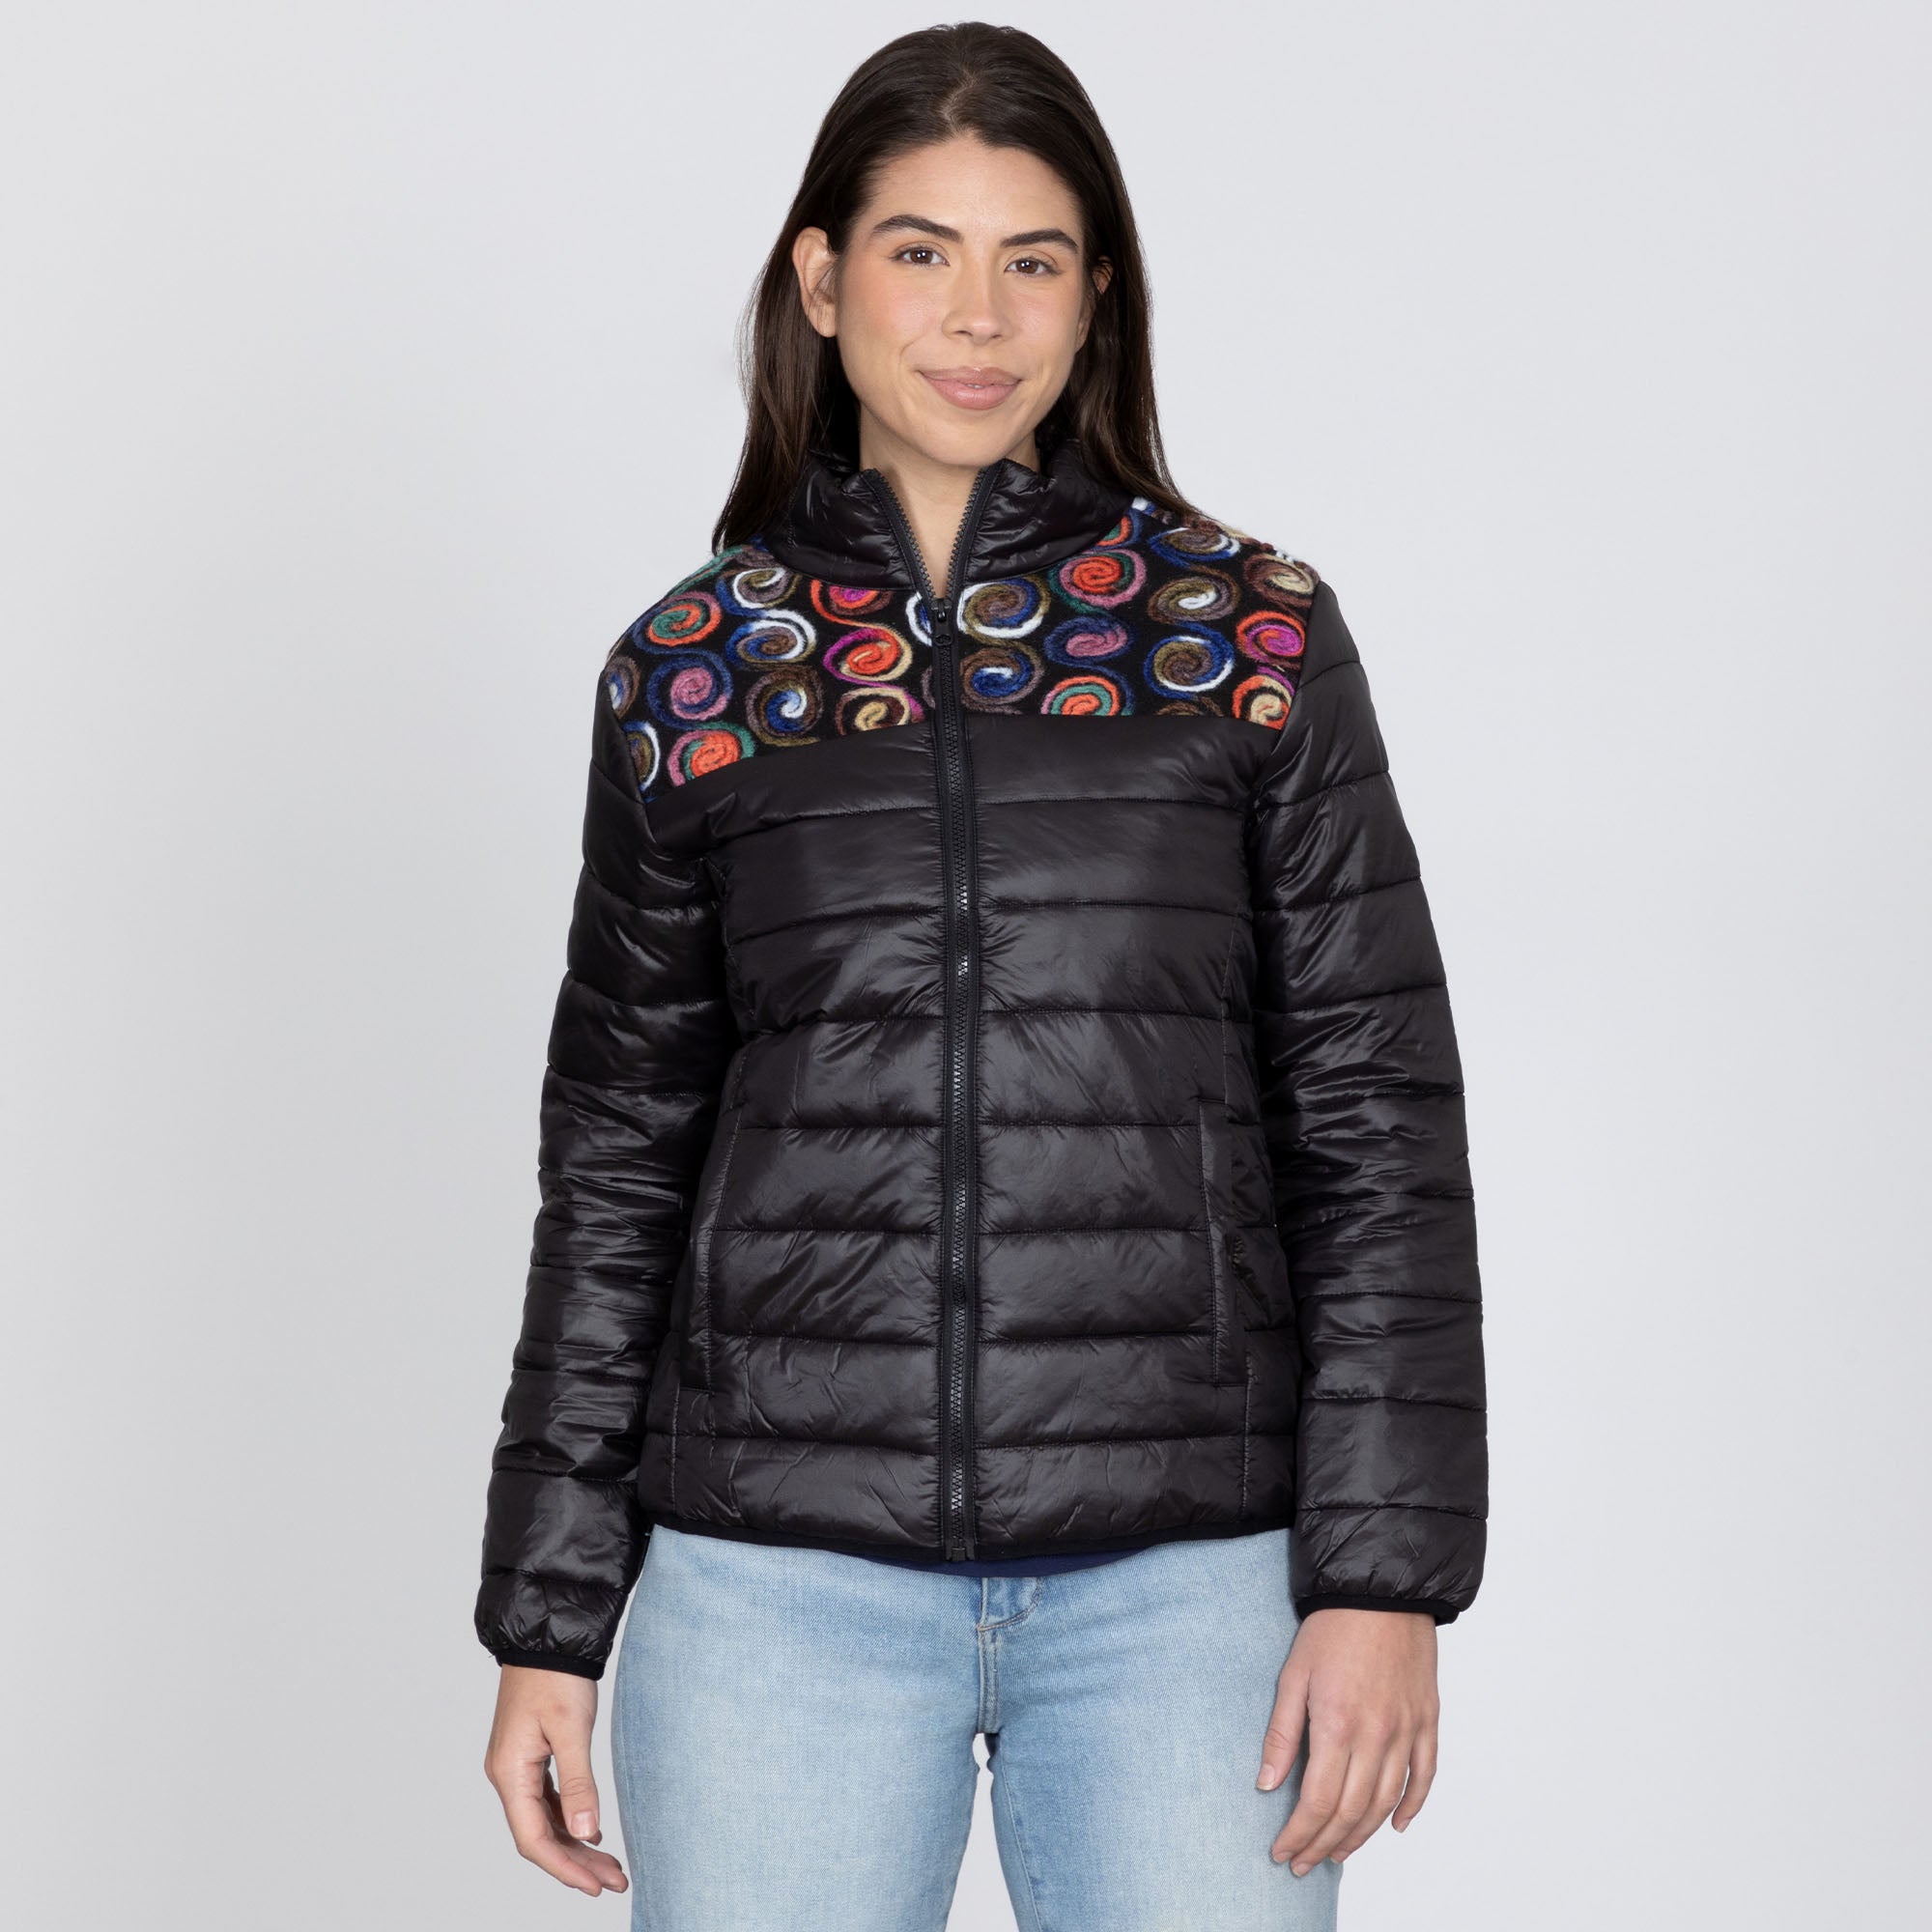 Mixed Fabric Embroidery Insulated Jacket - M